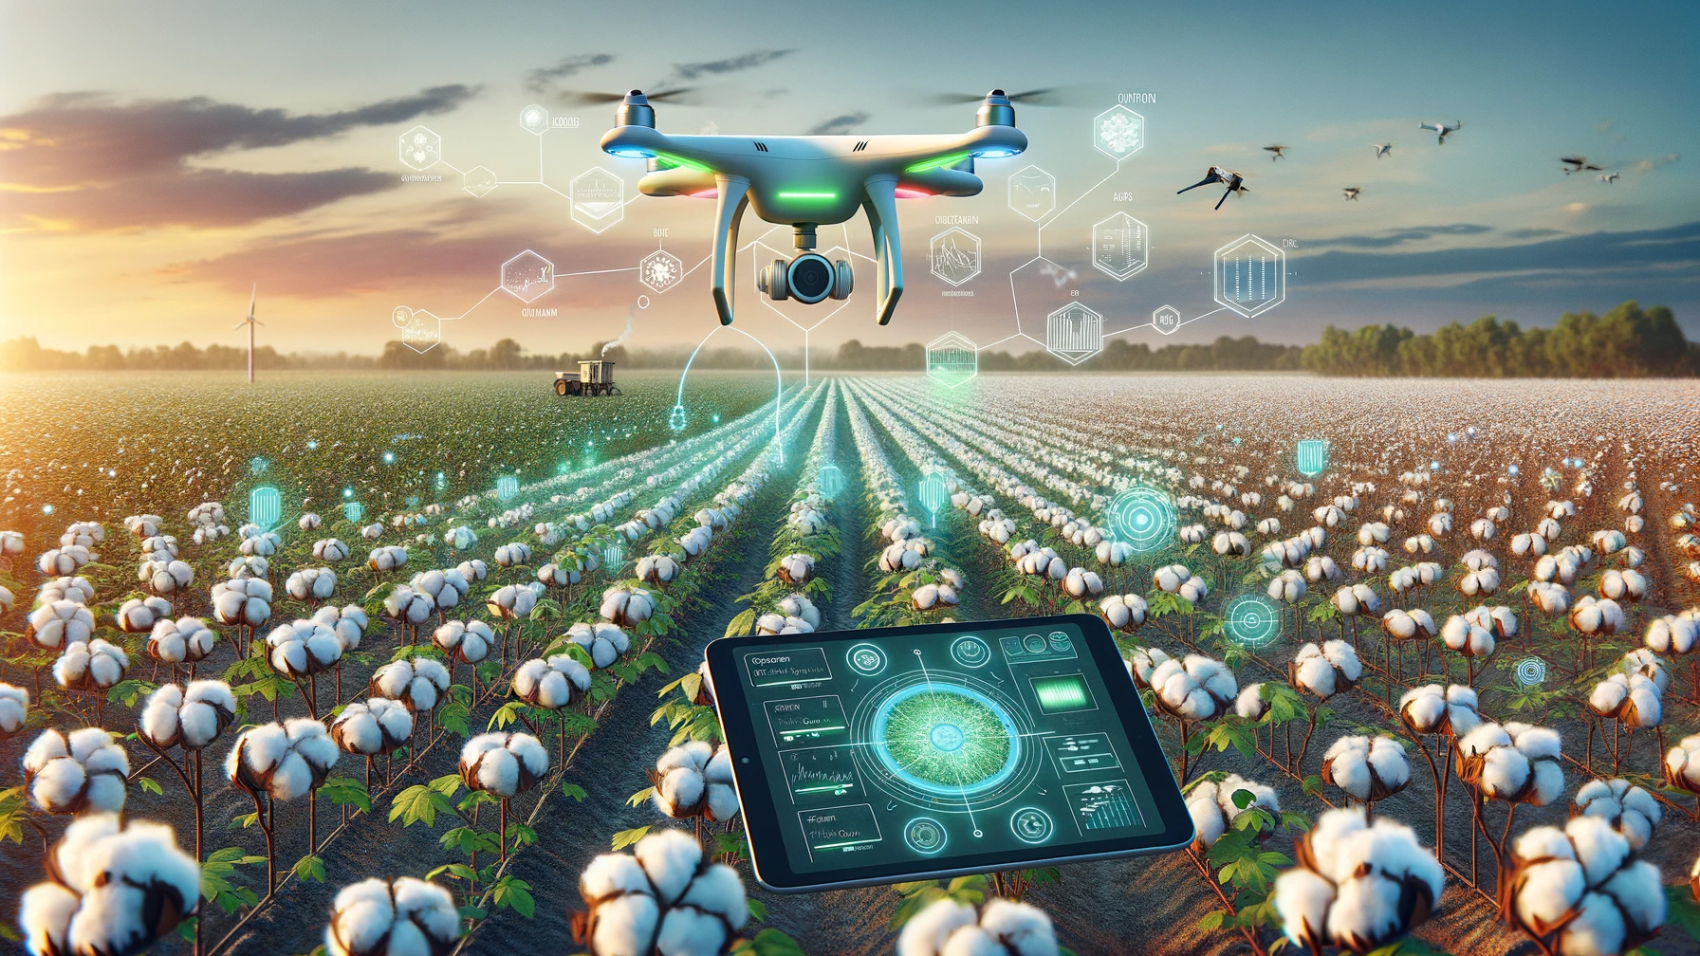 DALL·E 2023-12-01 16.04.27 - An image illustrating 'Cotton Crop Health Monitoring through Drone Imagery and IoT Sensors'. The scene should depict a drone flying over a vast cotton